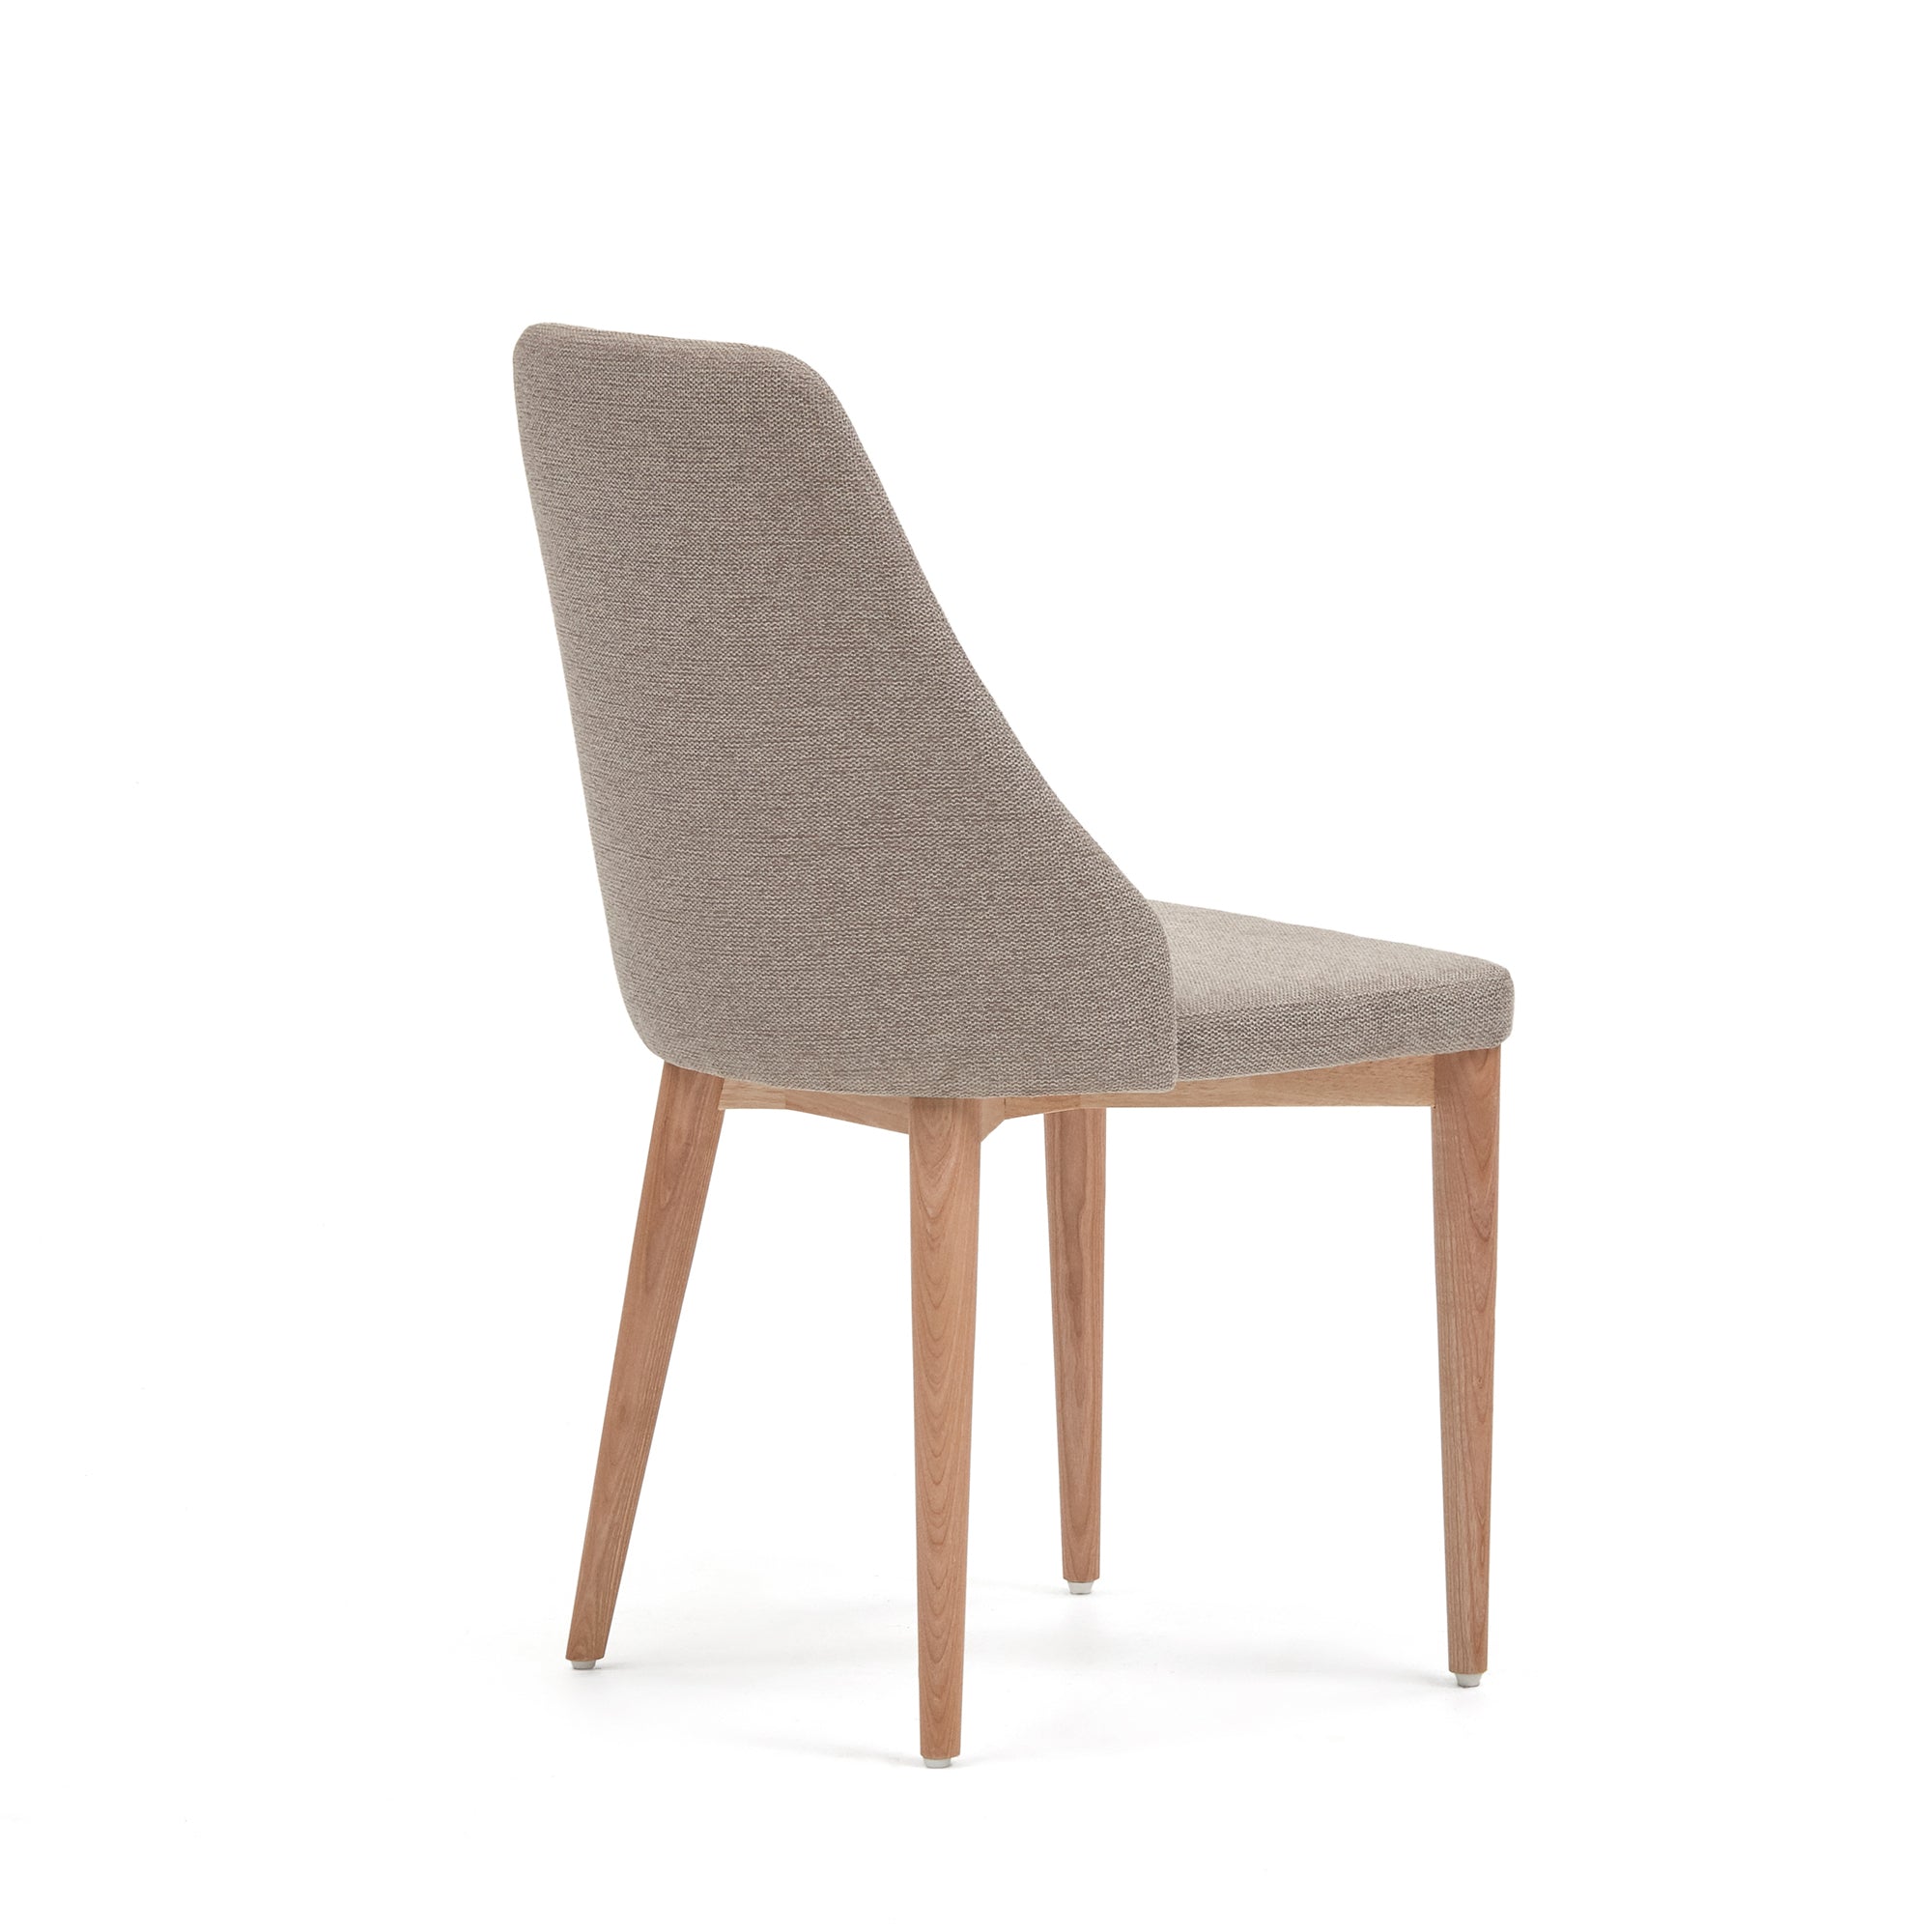 Rosie chair in brown chenille with solid ash wood legs in a natural finish